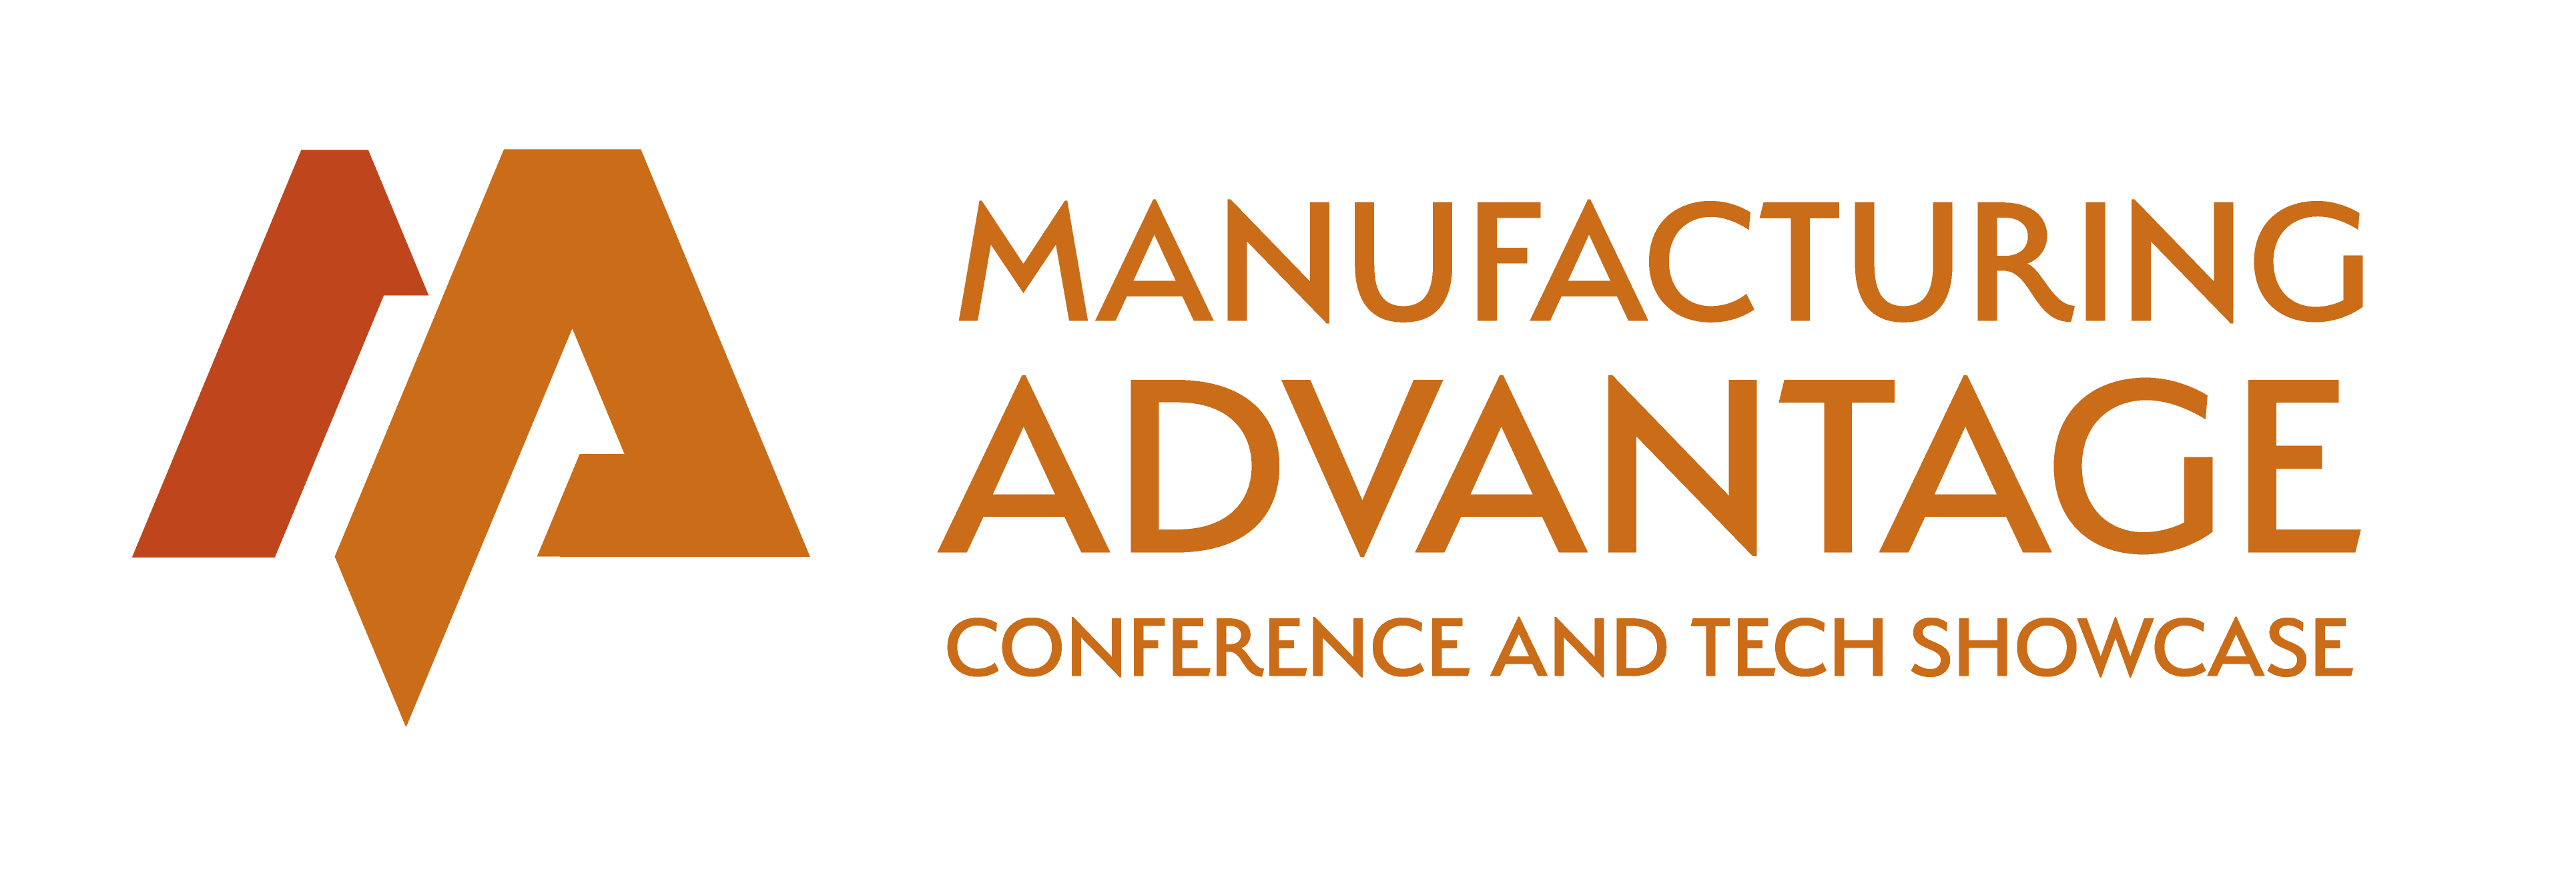 Manufacturing Advantage Conference